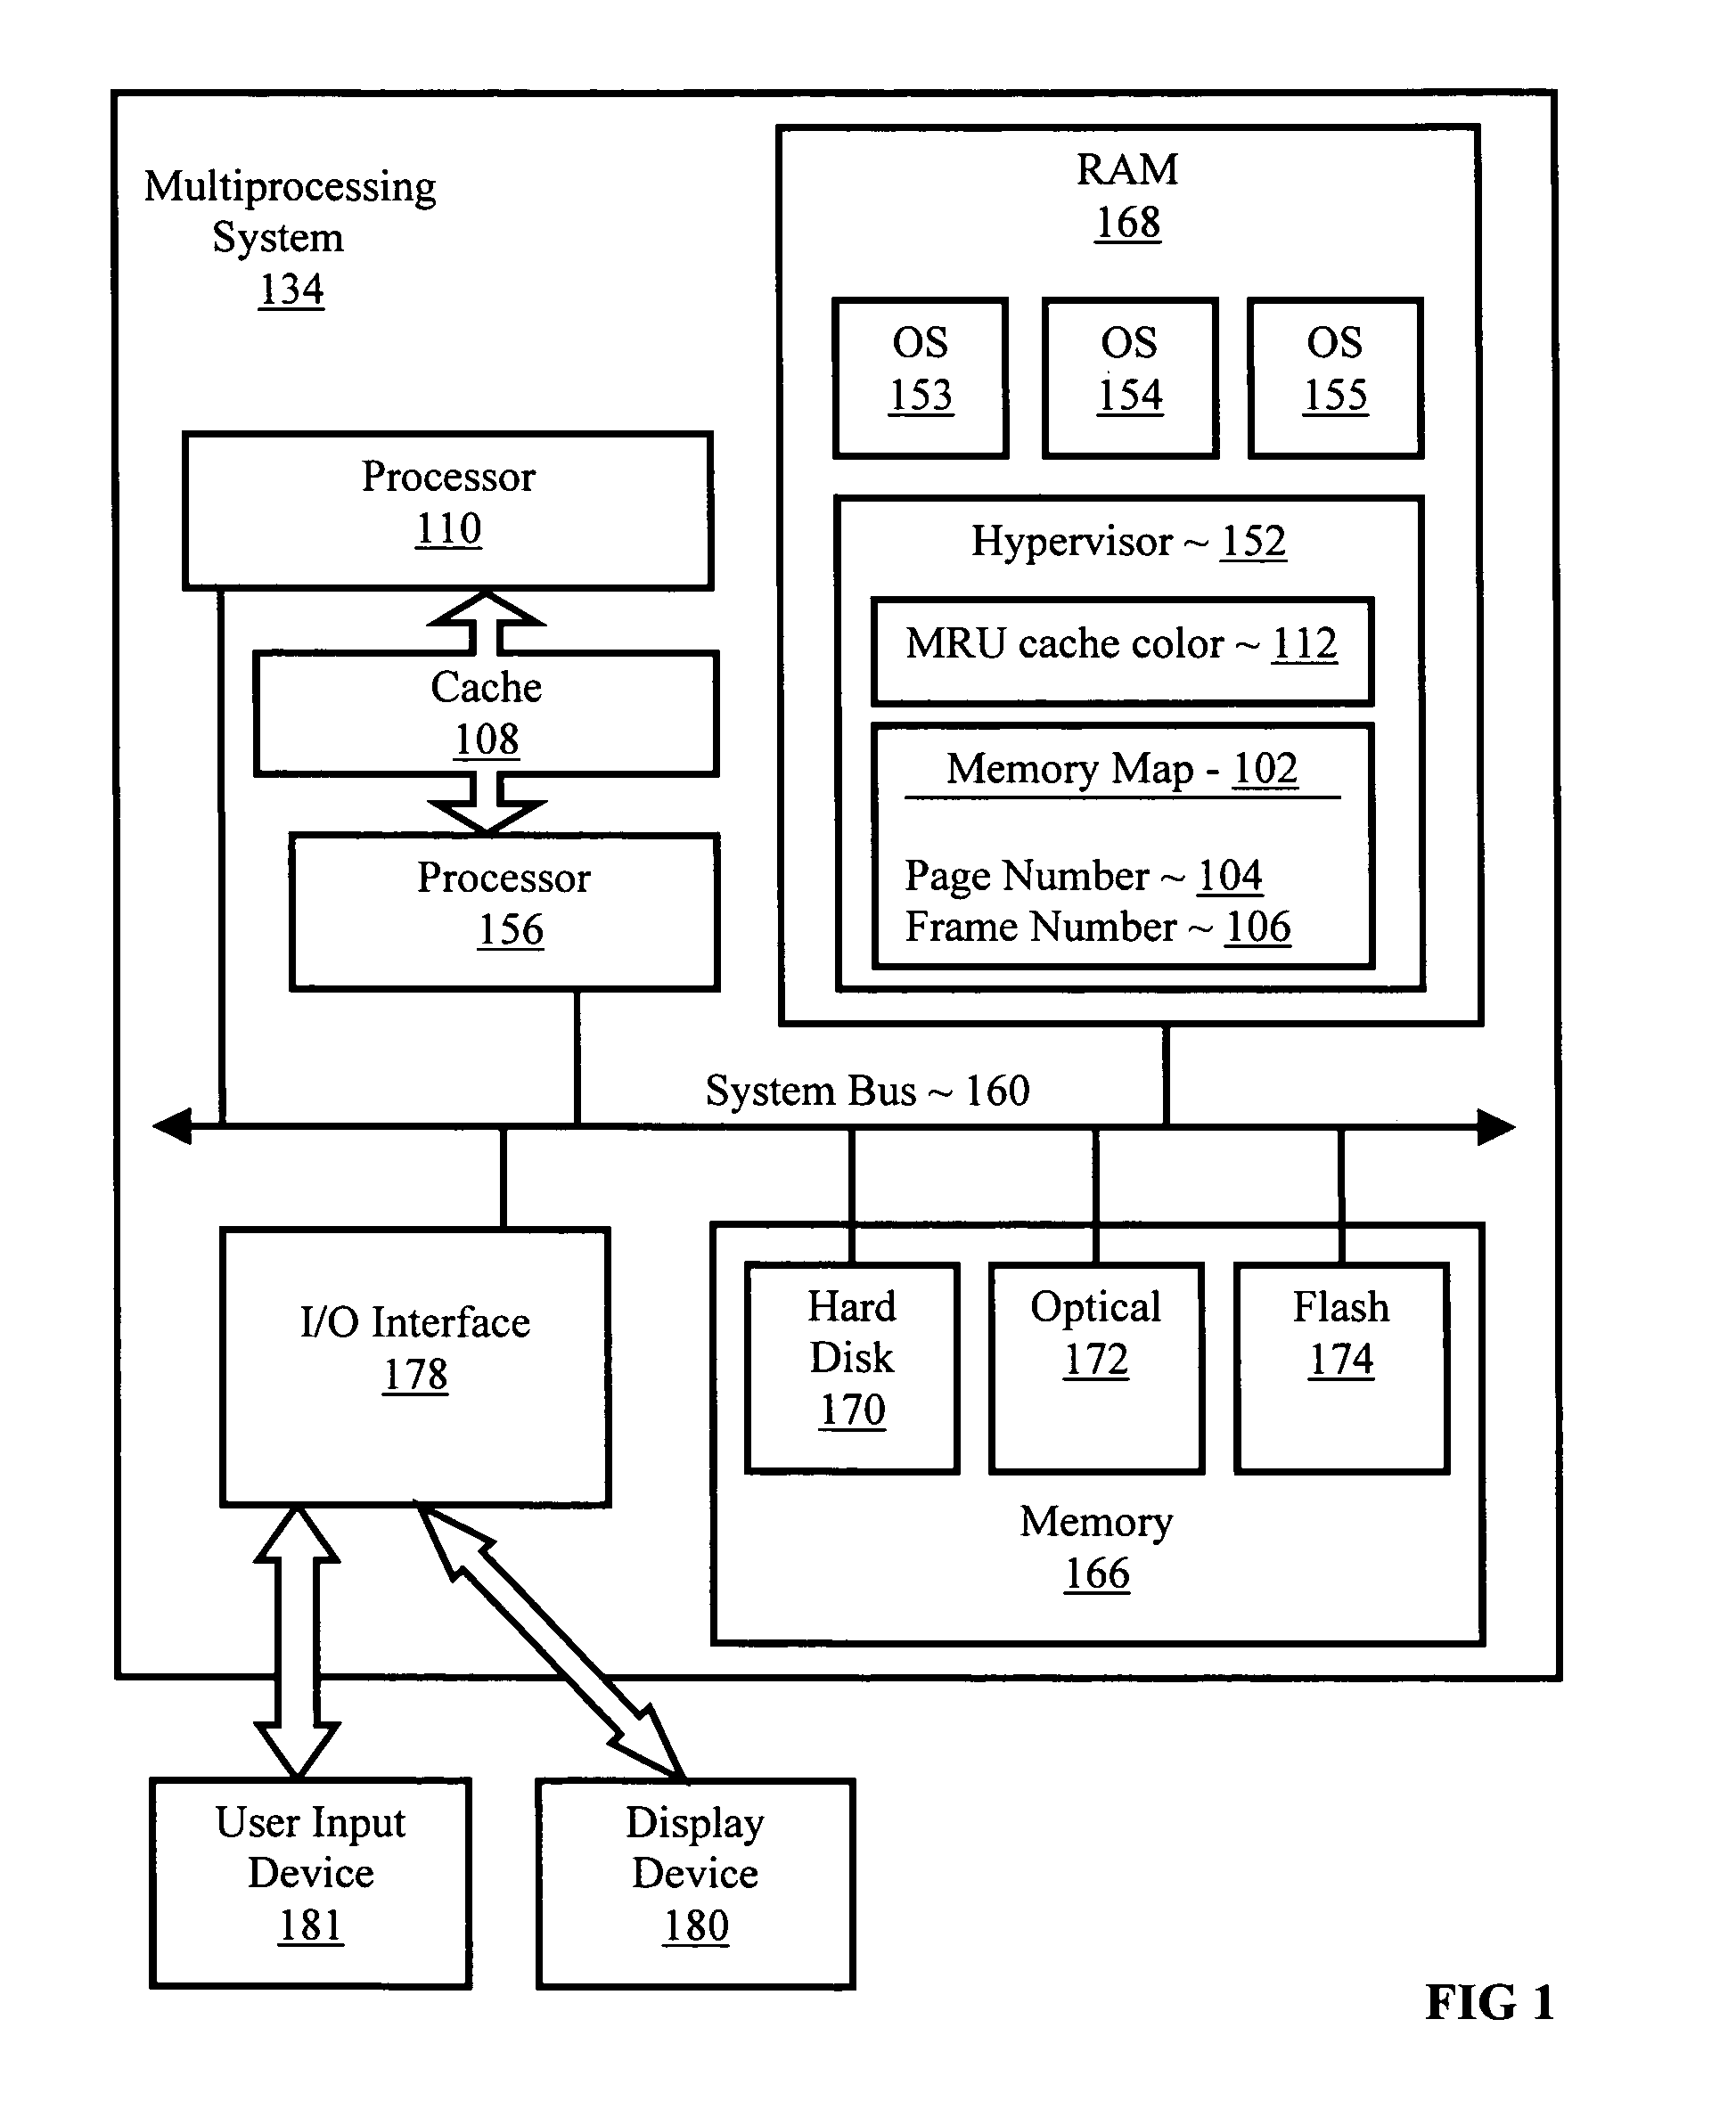 Memory mapping to reduce cache conflicts in multiprocessor systems